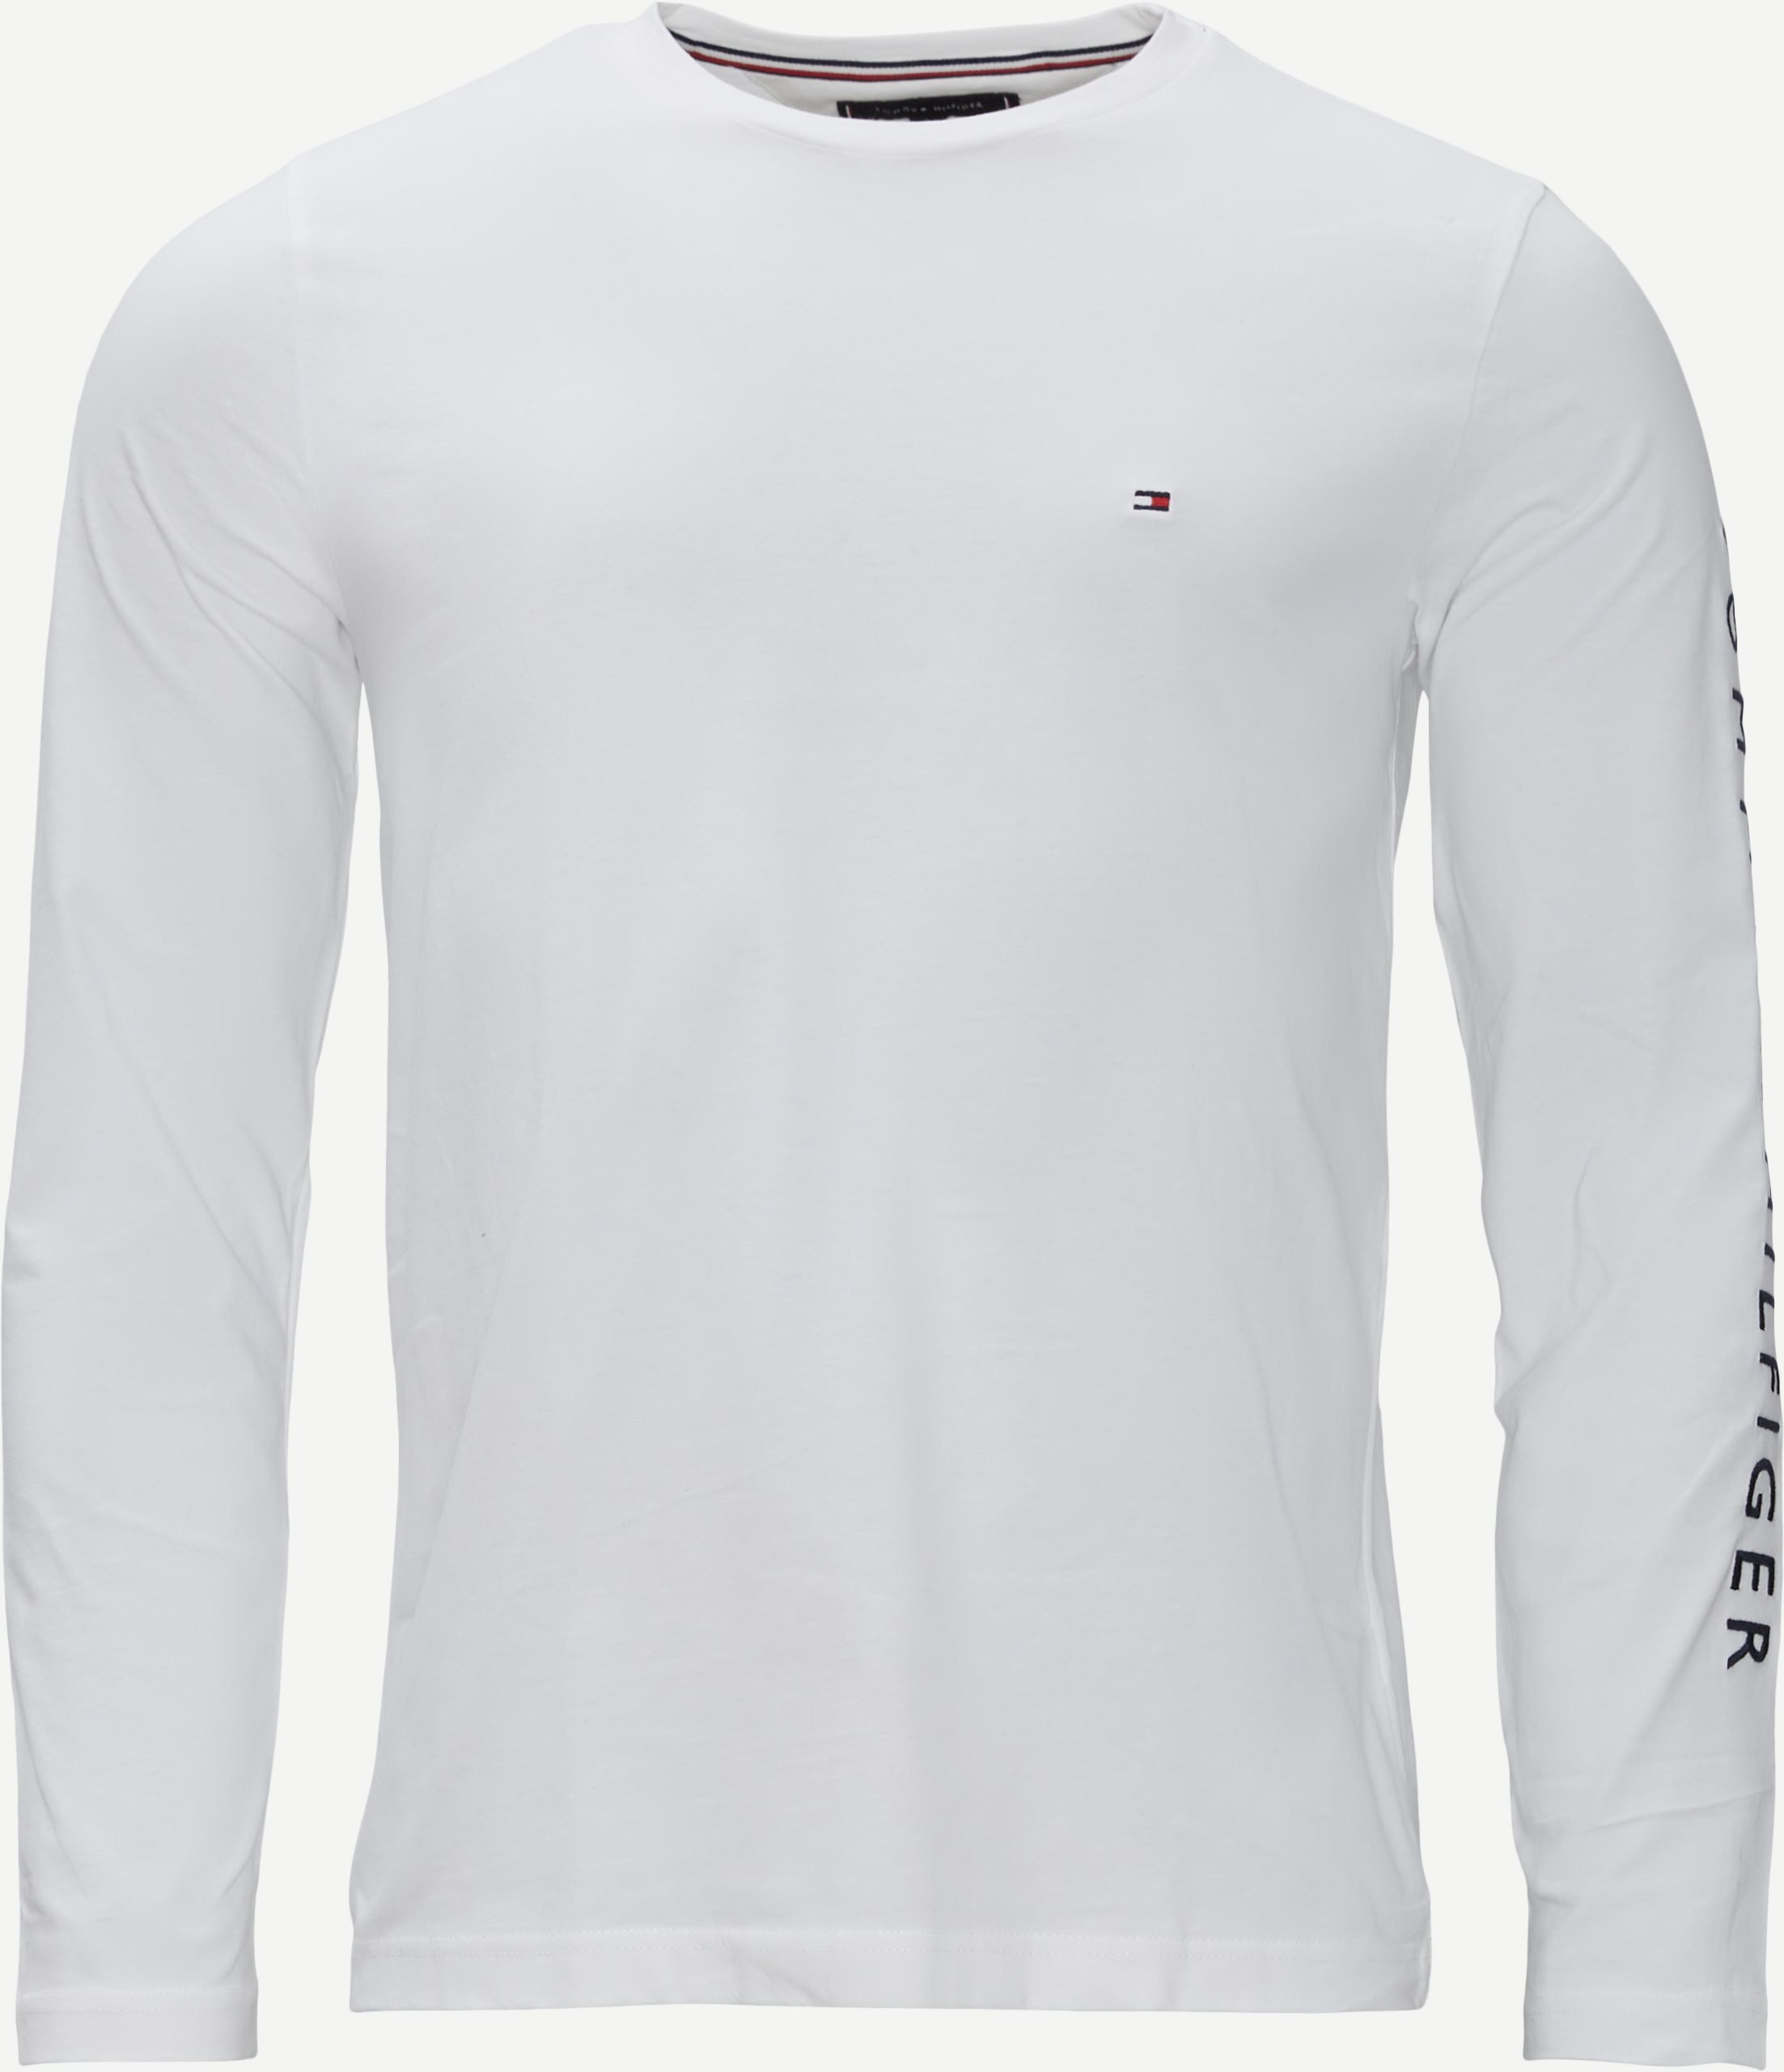 Tommy logo long sleeve tee - T-shirts - Regular fit - White